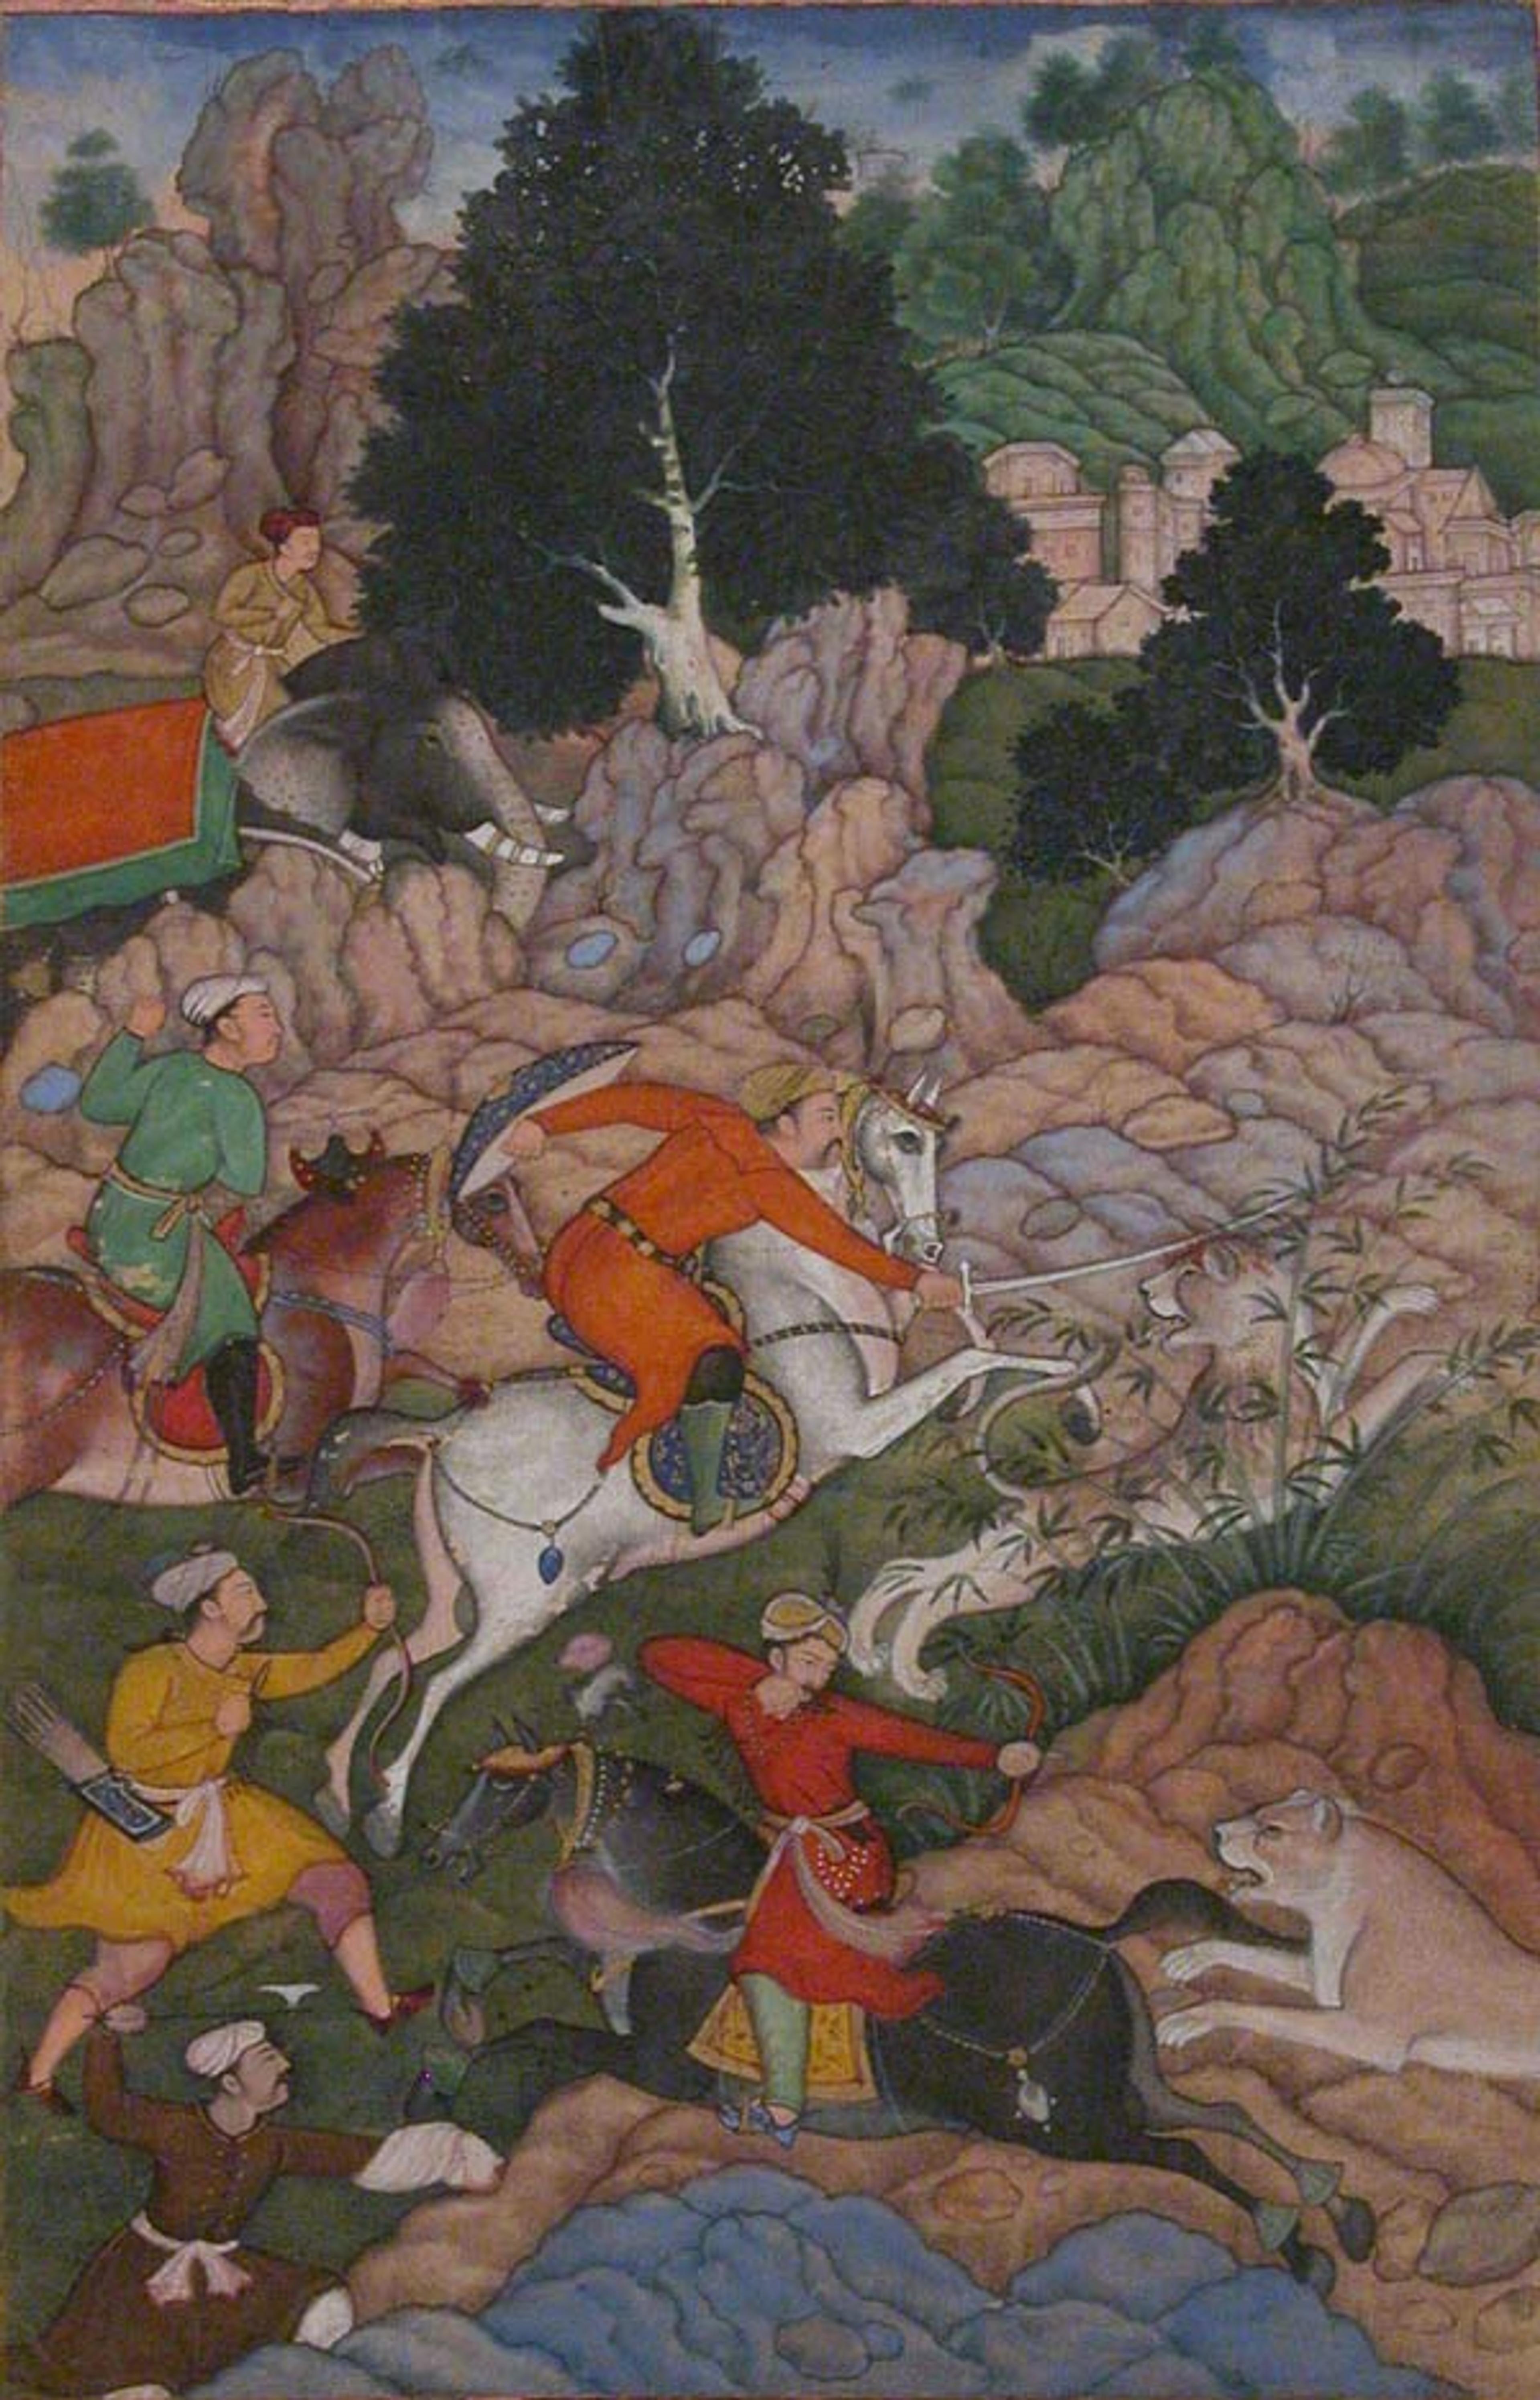 "Akbar Hunting," folio from an Akbarnama (History of Akbar), late 16th century. Present-day Pakistan, probably Lahore. Islamic. Opaque watercolor, ink, and gold on paper; Painting: 7 1/2 x 4 7/8 in. (19.1 x 12.4 cm). The Metropolitan Museum of Art, New York, Rogers Fund, 1911 (11.39.2)